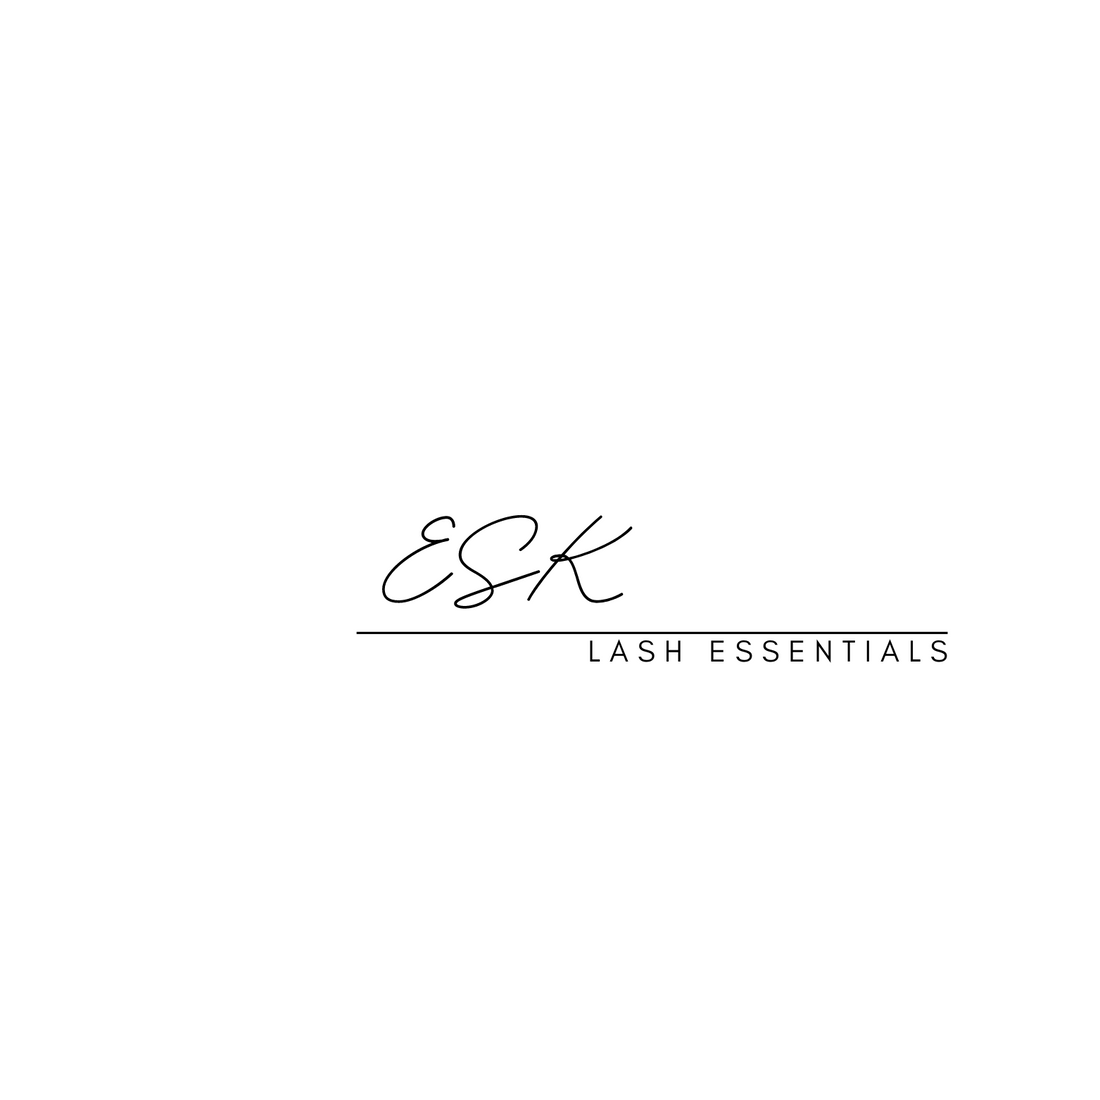 Lash Love with ESK! ESK eyelash extension products and supplies 8/16/233 6:25pm